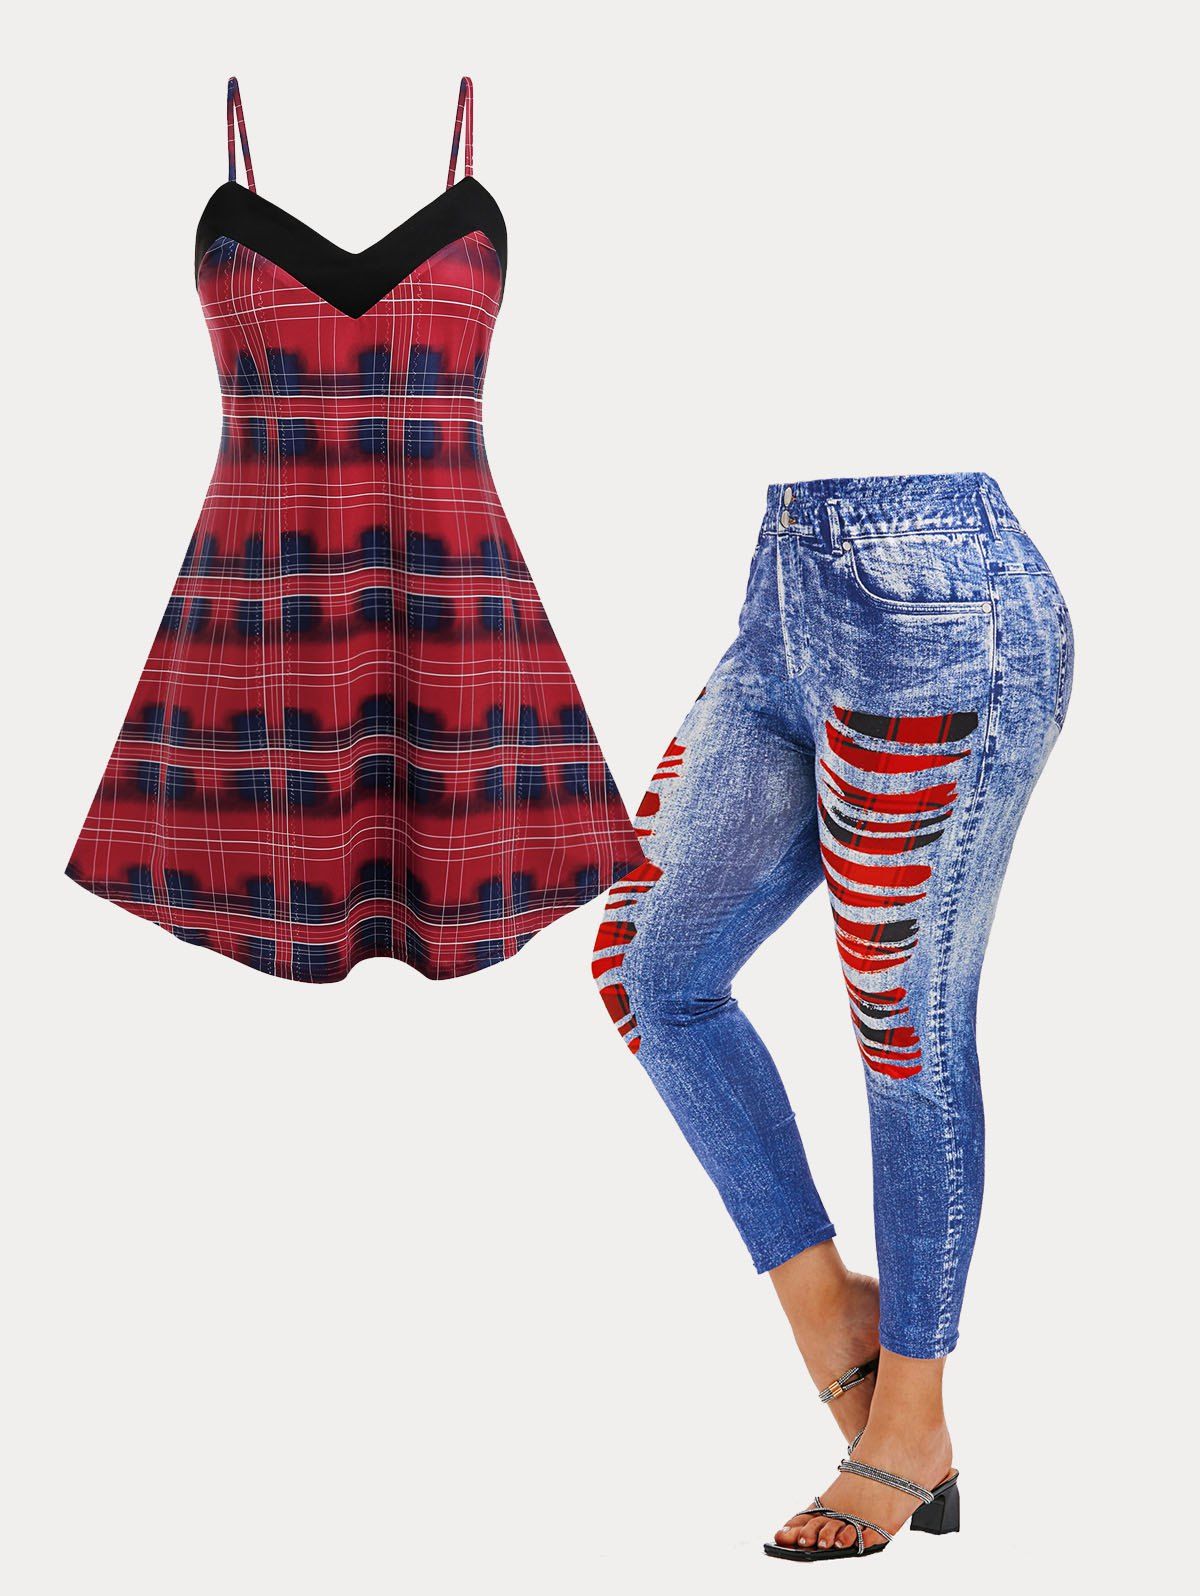 New Prevailing Plaid Backless Tunic Cami Top and Jeggings Plus Size Summer Outfit  